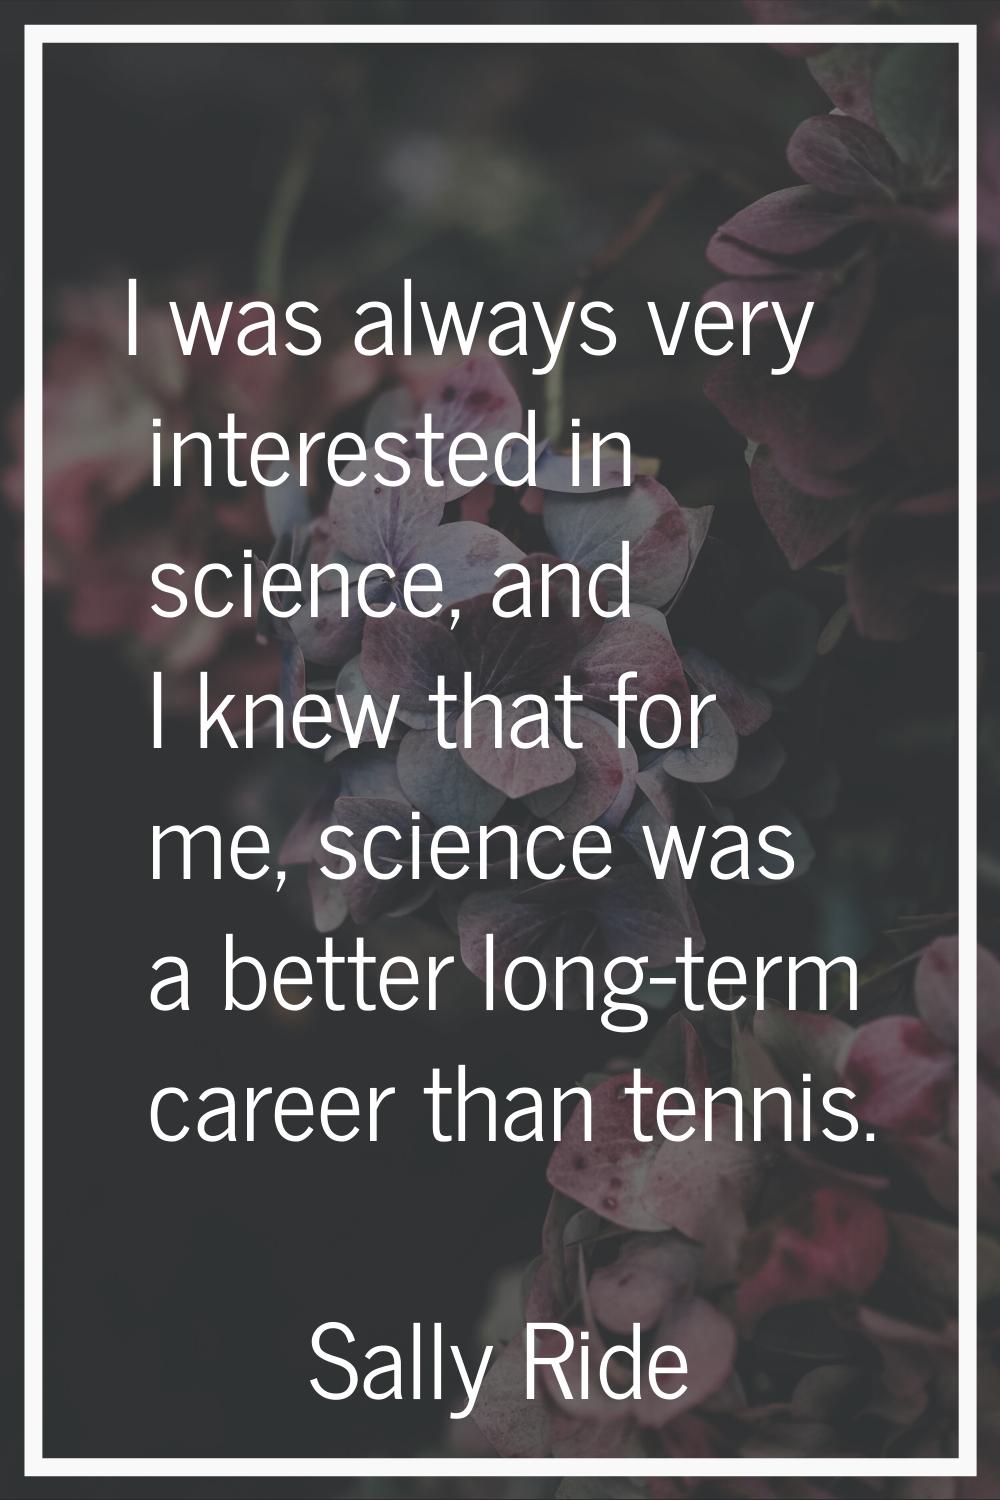 I was always very interested in science, and I knew that for me, science was a better long-term car